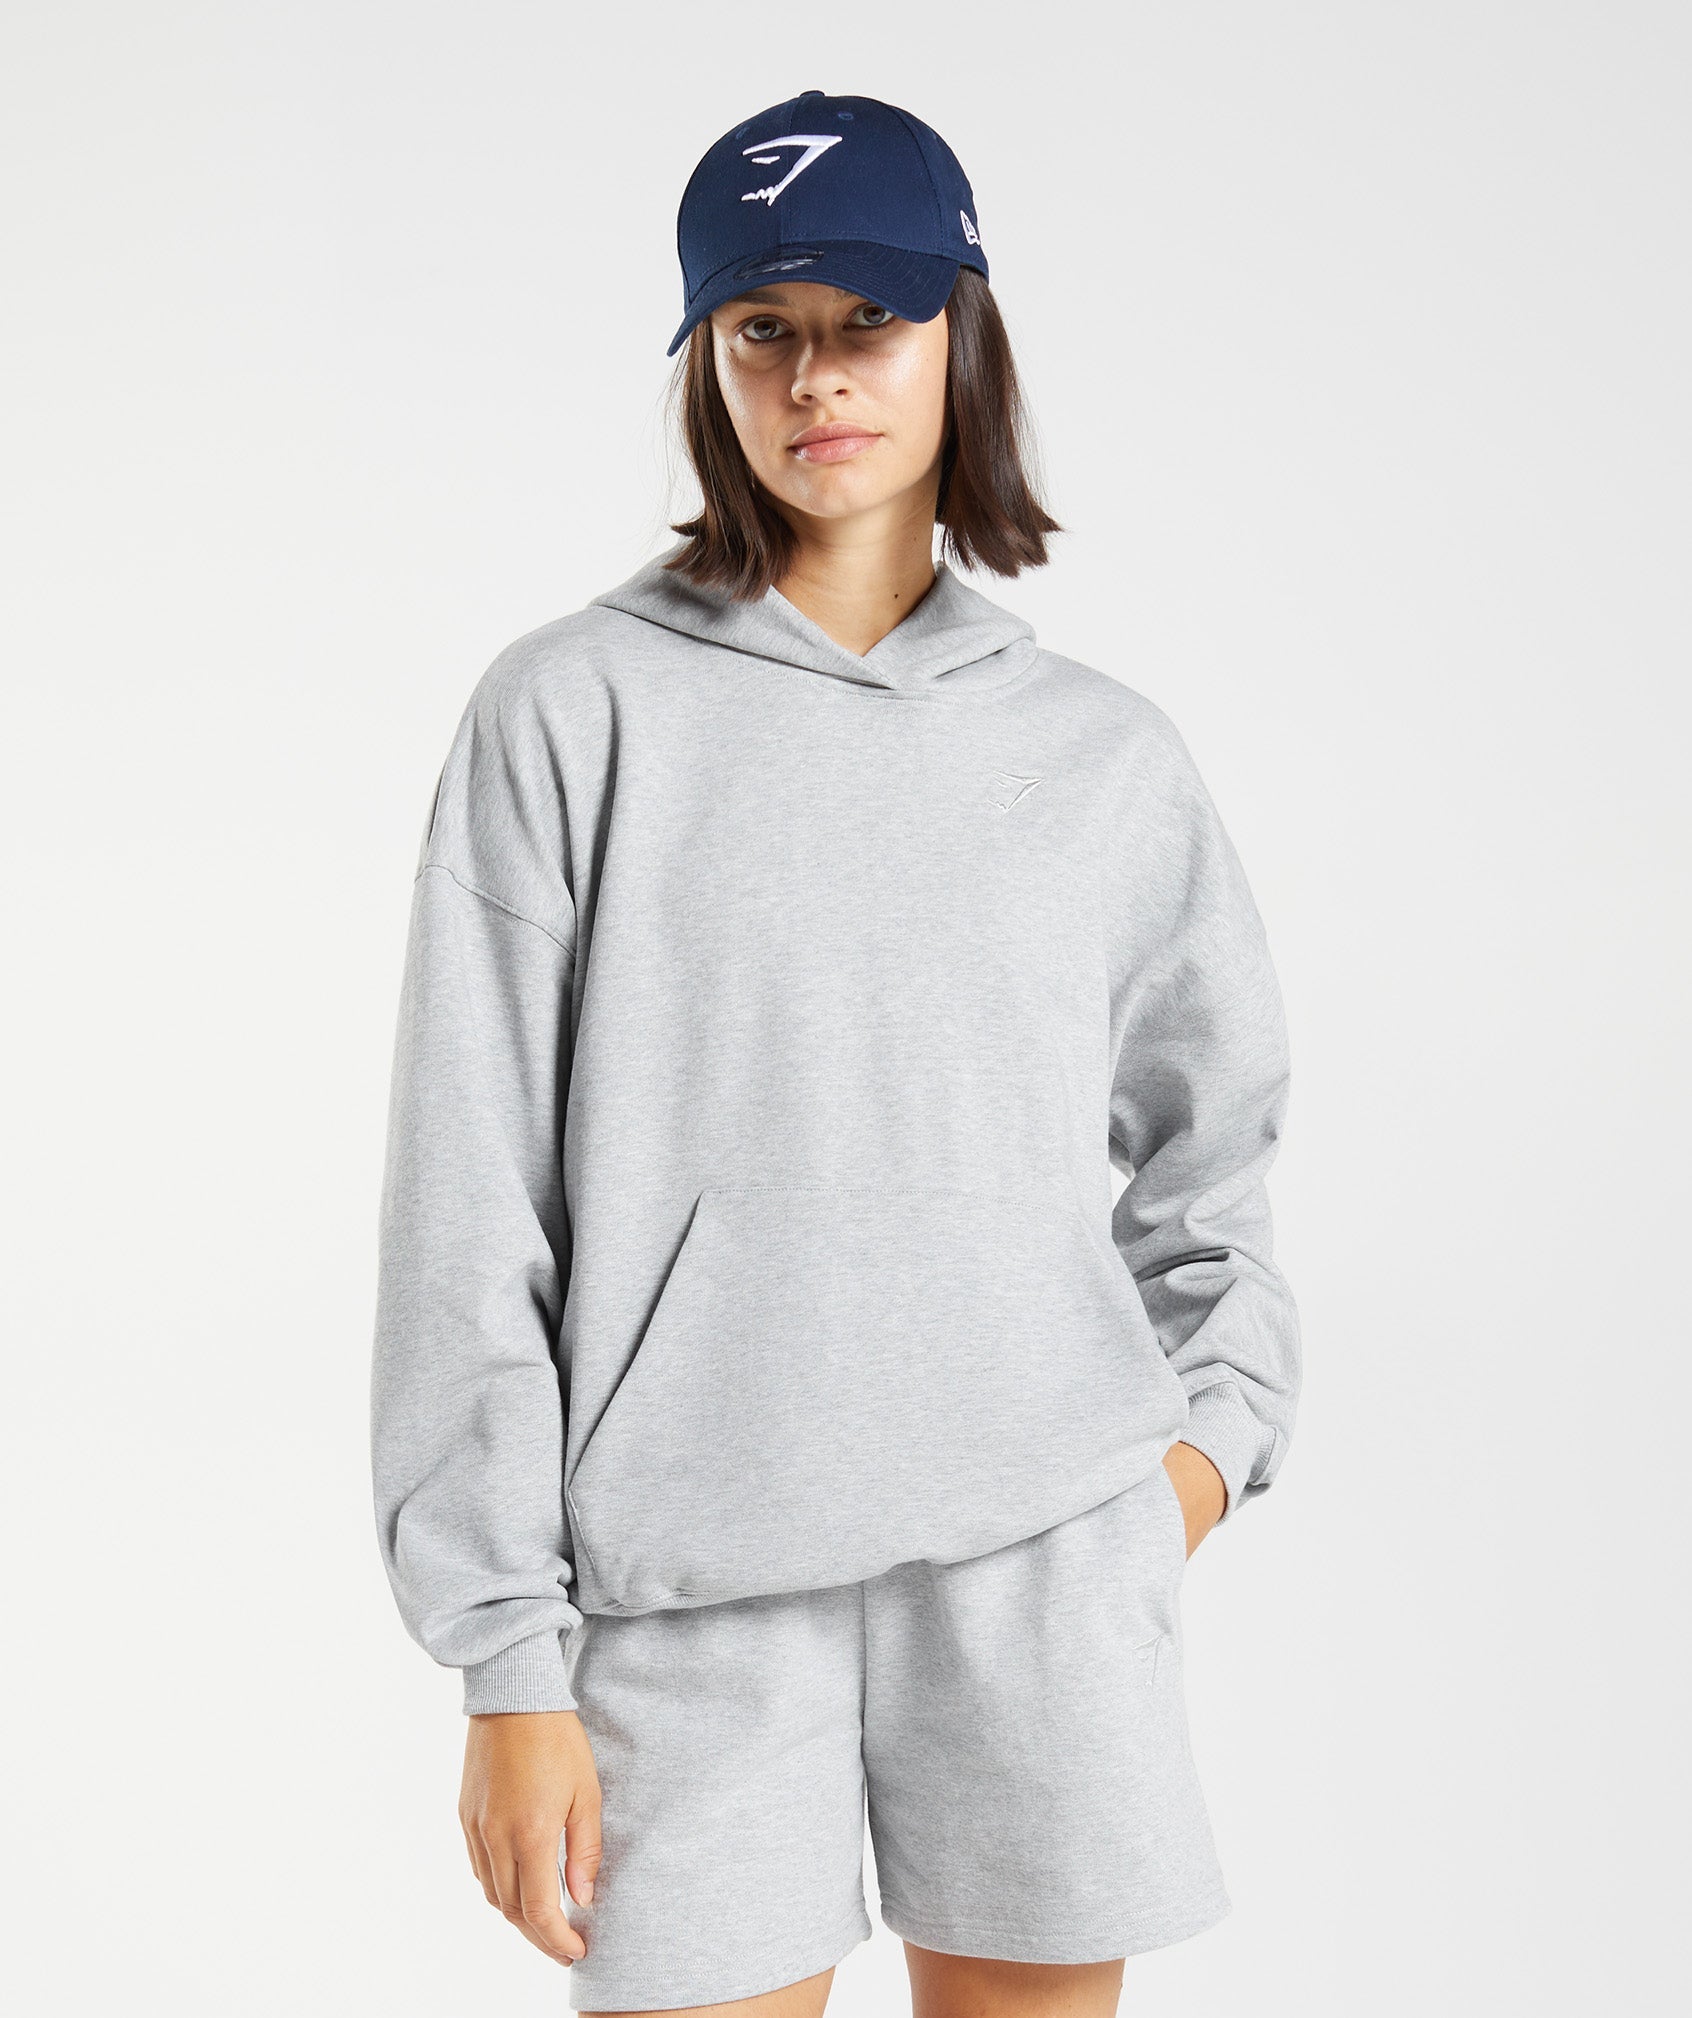 Rest Day Sweats Hoodie in Light Grey Core Marl - view 1